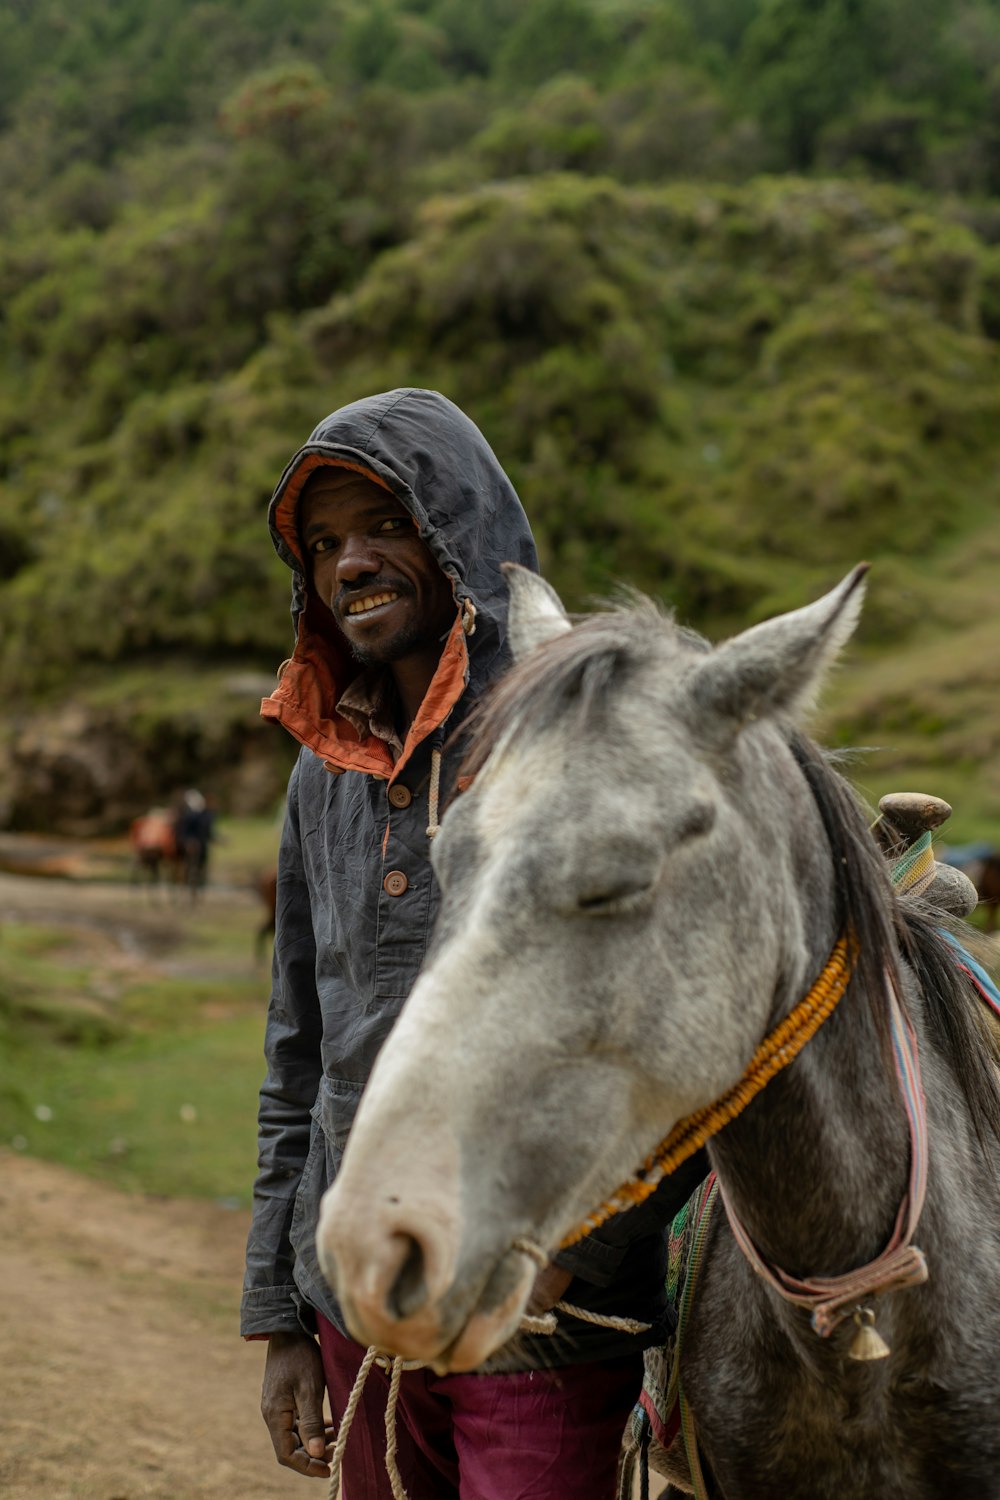 a man standing next to a horse on a dirt road